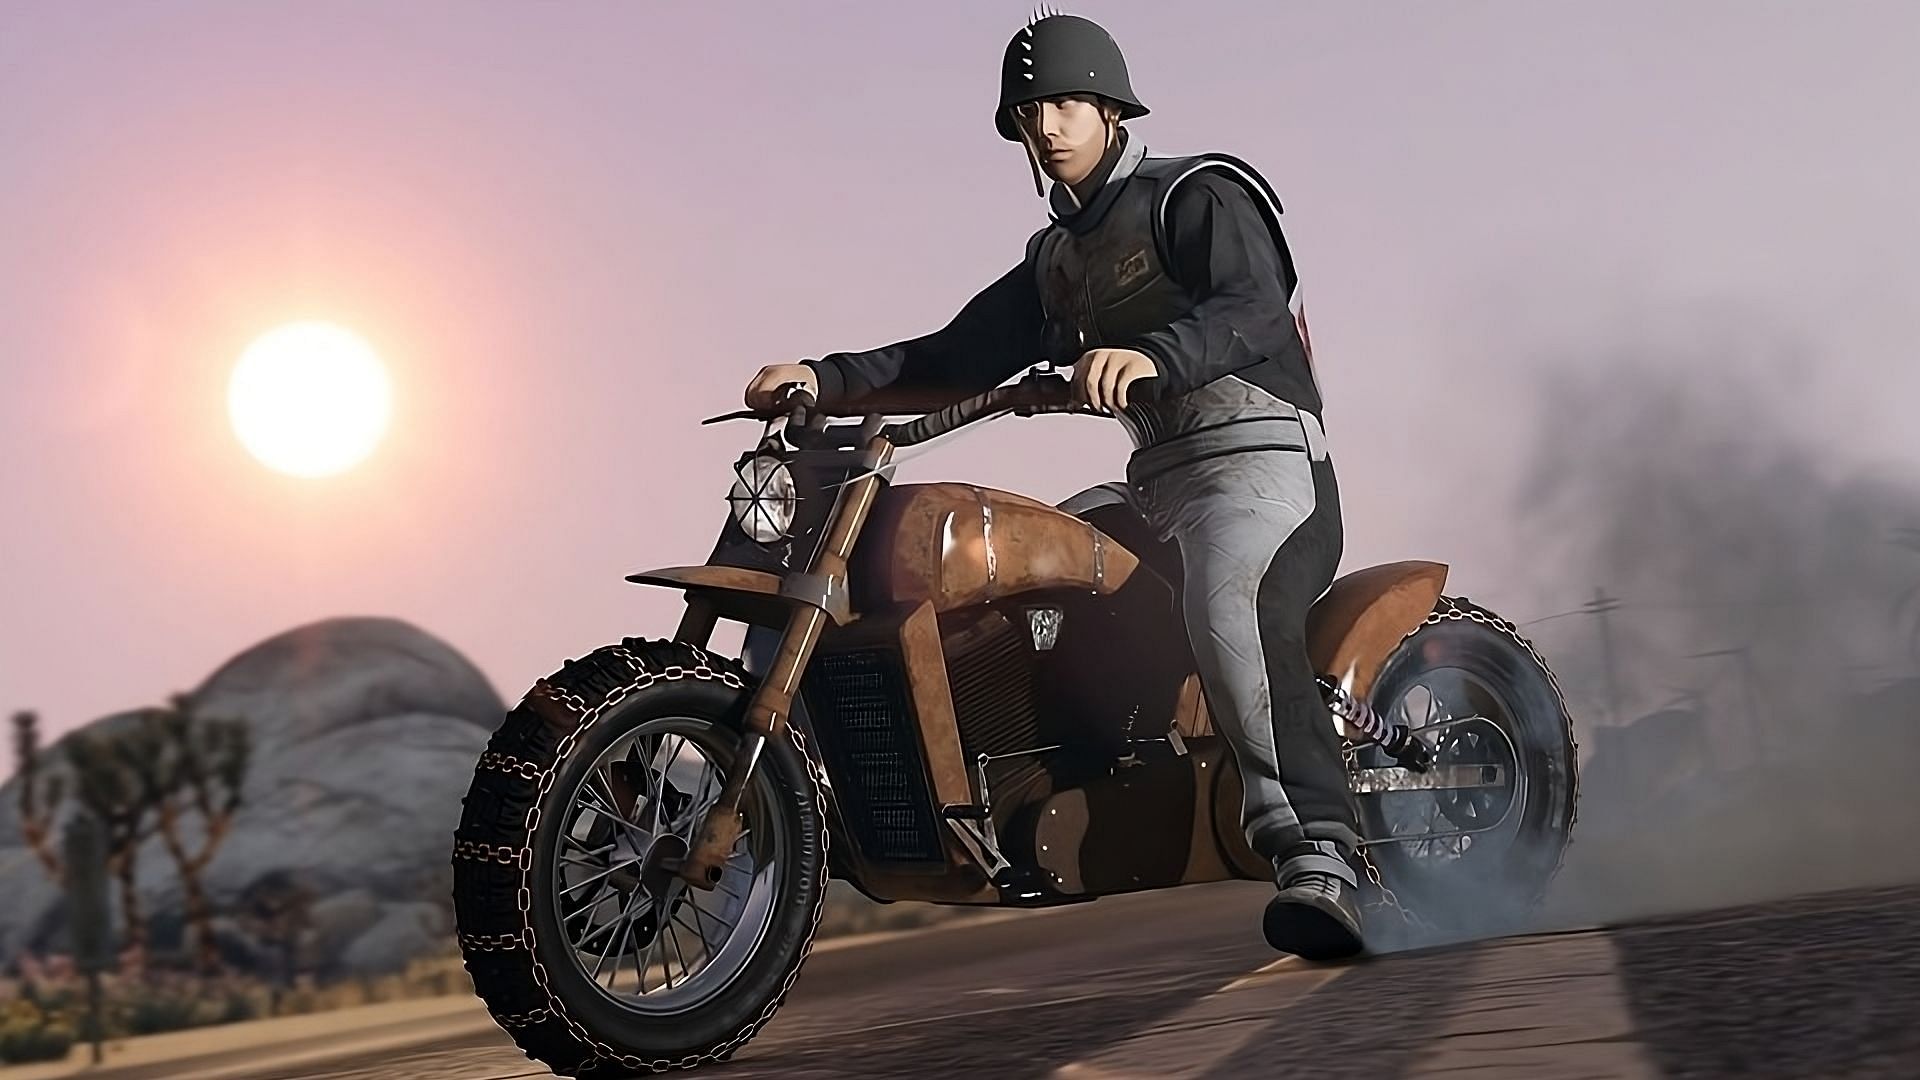 The motorcycle in question (Image via Rockstar Games)